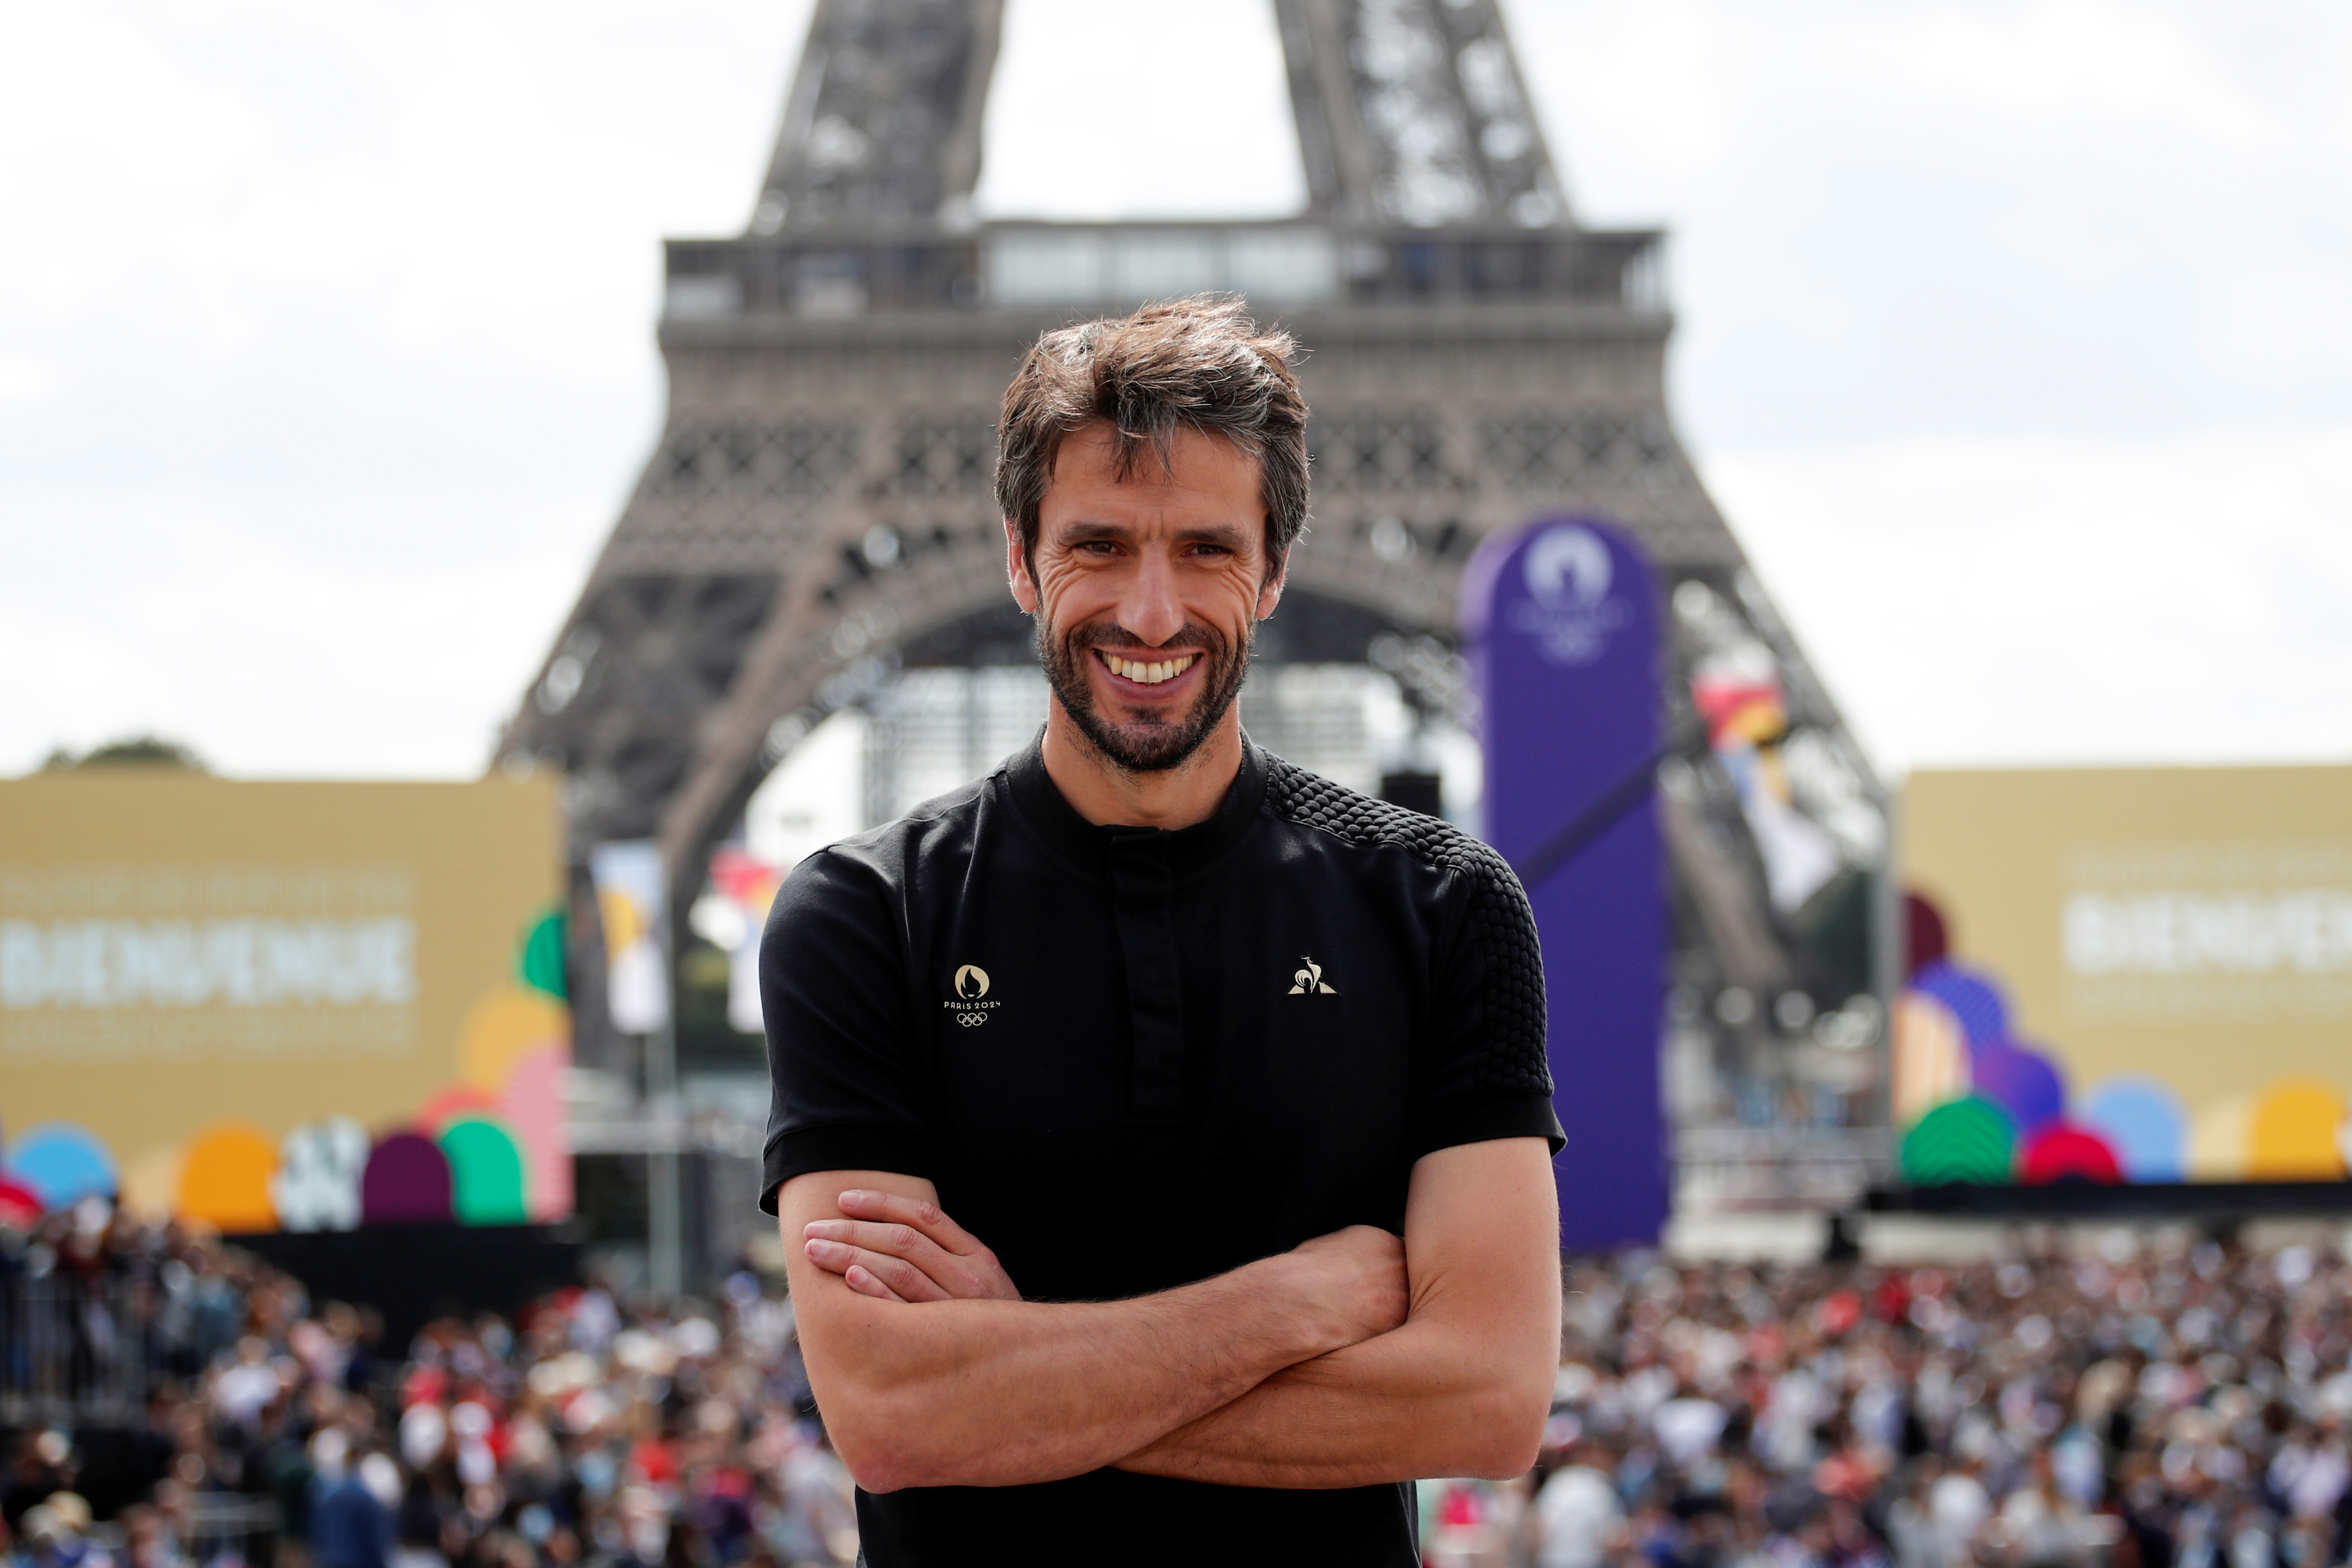 Paris 2024 Olympics Organising Committee President Tony Estanguet poses in front of the Eiffel Tower as people gather at Paris' Olympics fan zone to watch the closing ceremony of the Tokyo games, at Trocadero Gardens in Paris, France, August 8, 2021. REUTERS/Benoit Tessier